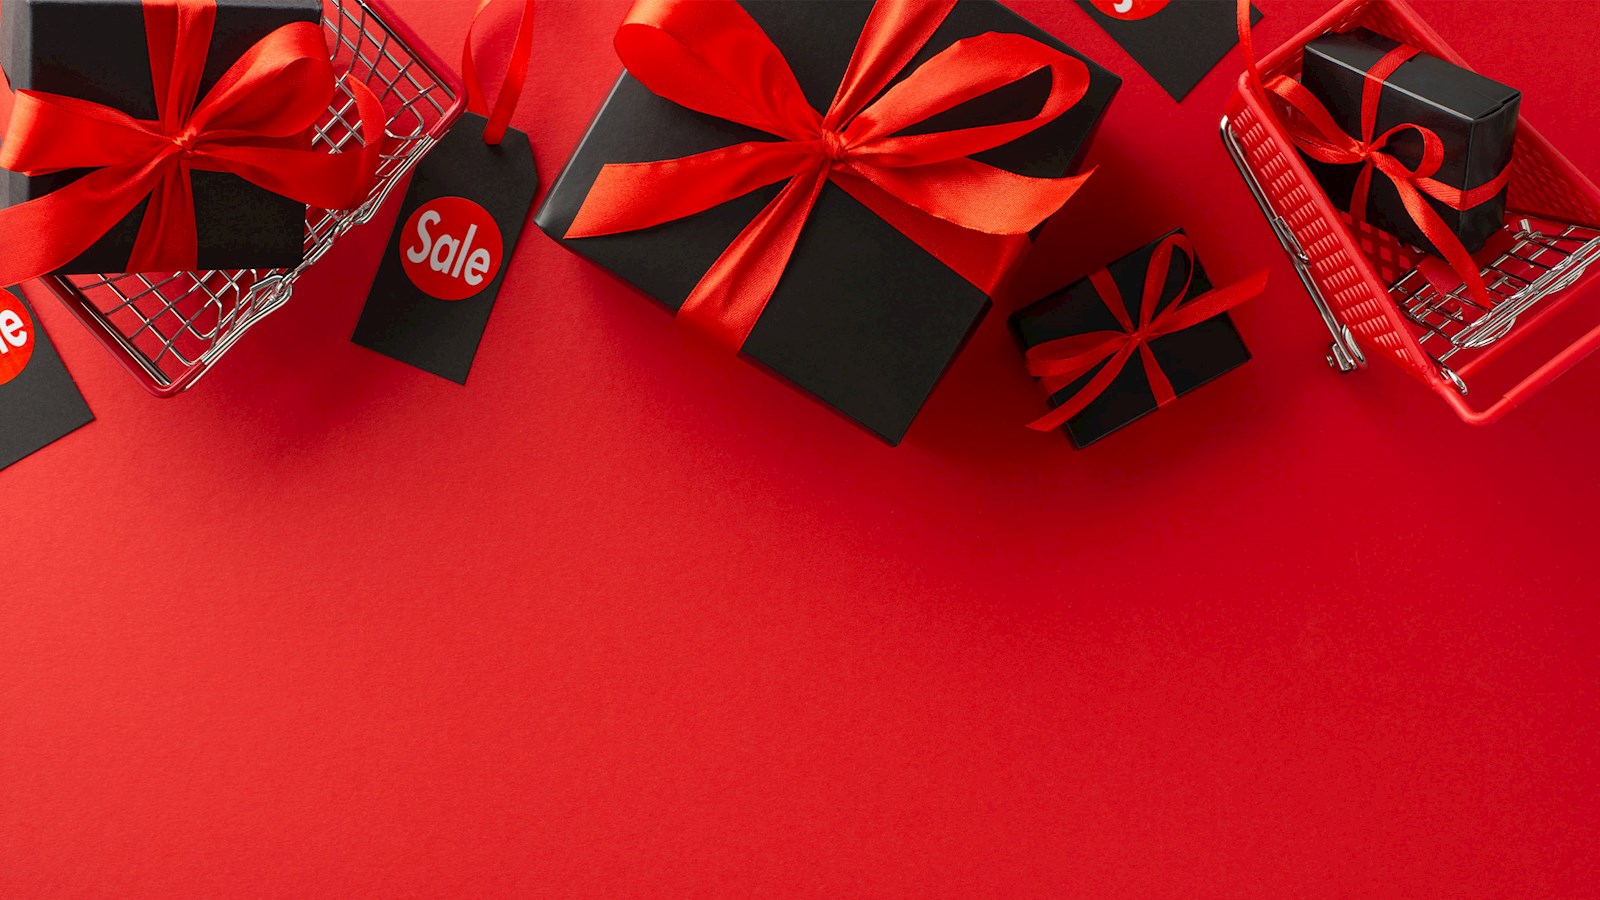 Presents and gifts with sale tags on red background